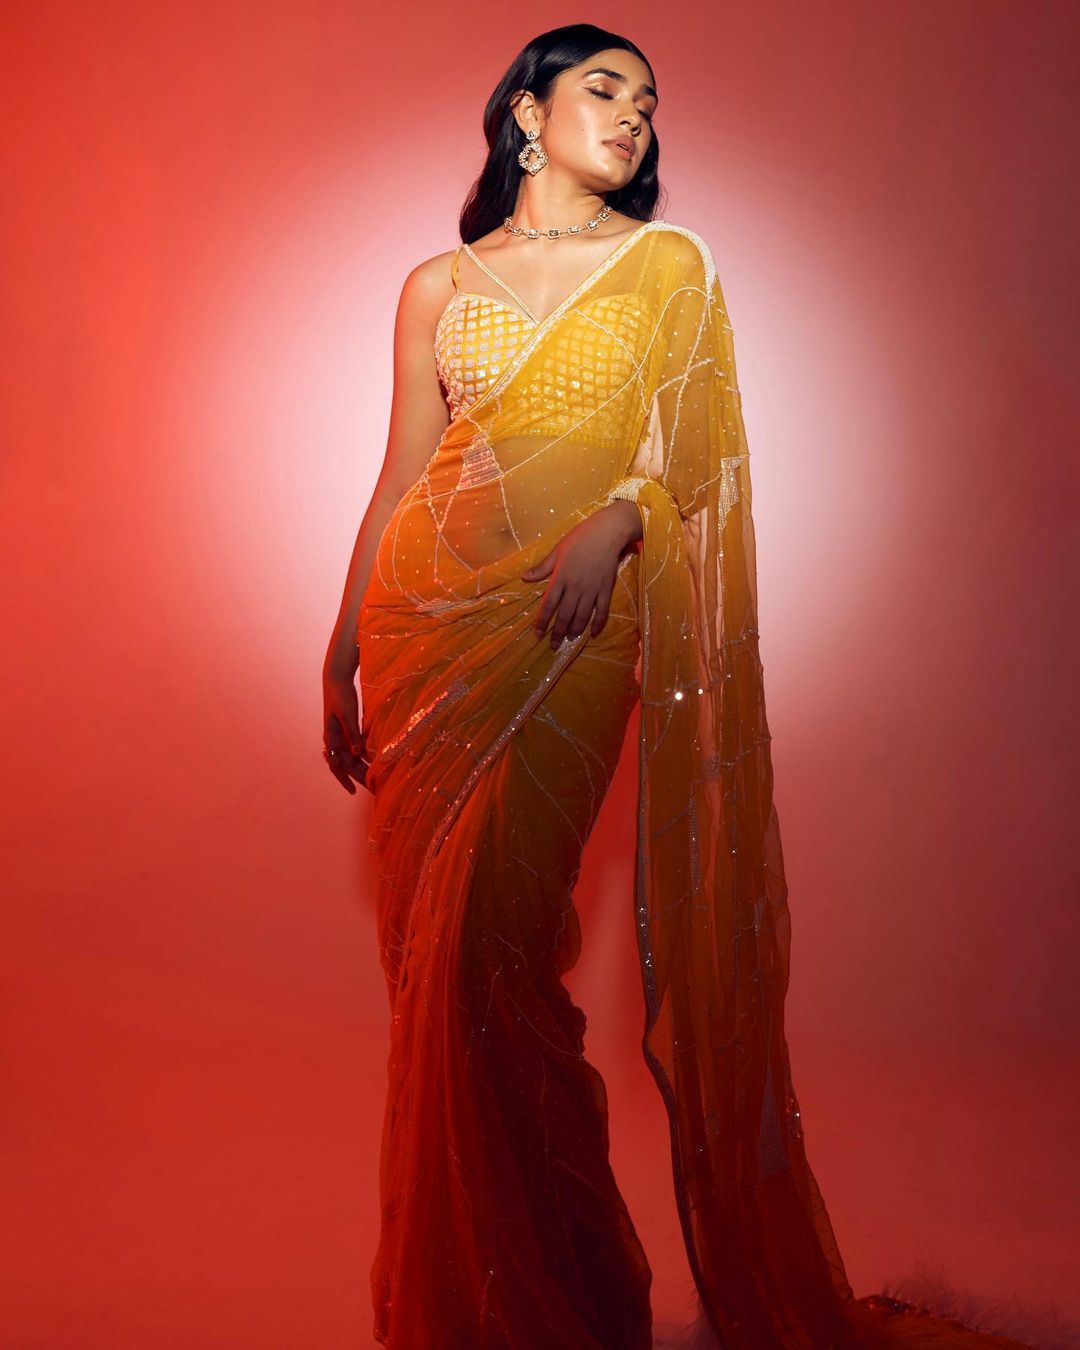 Gorgeous young beauty actress krithi shetty photo shoot images-Styleicon, Actresskrithi, Celebrity, Filmindustry, Indiancinema, Krithi Shetty, Krithishetty, Maara, Movieups, Newactress, Risingsta Photos,Spicy Hot Pics,Images,High Resolution WallPapers Download